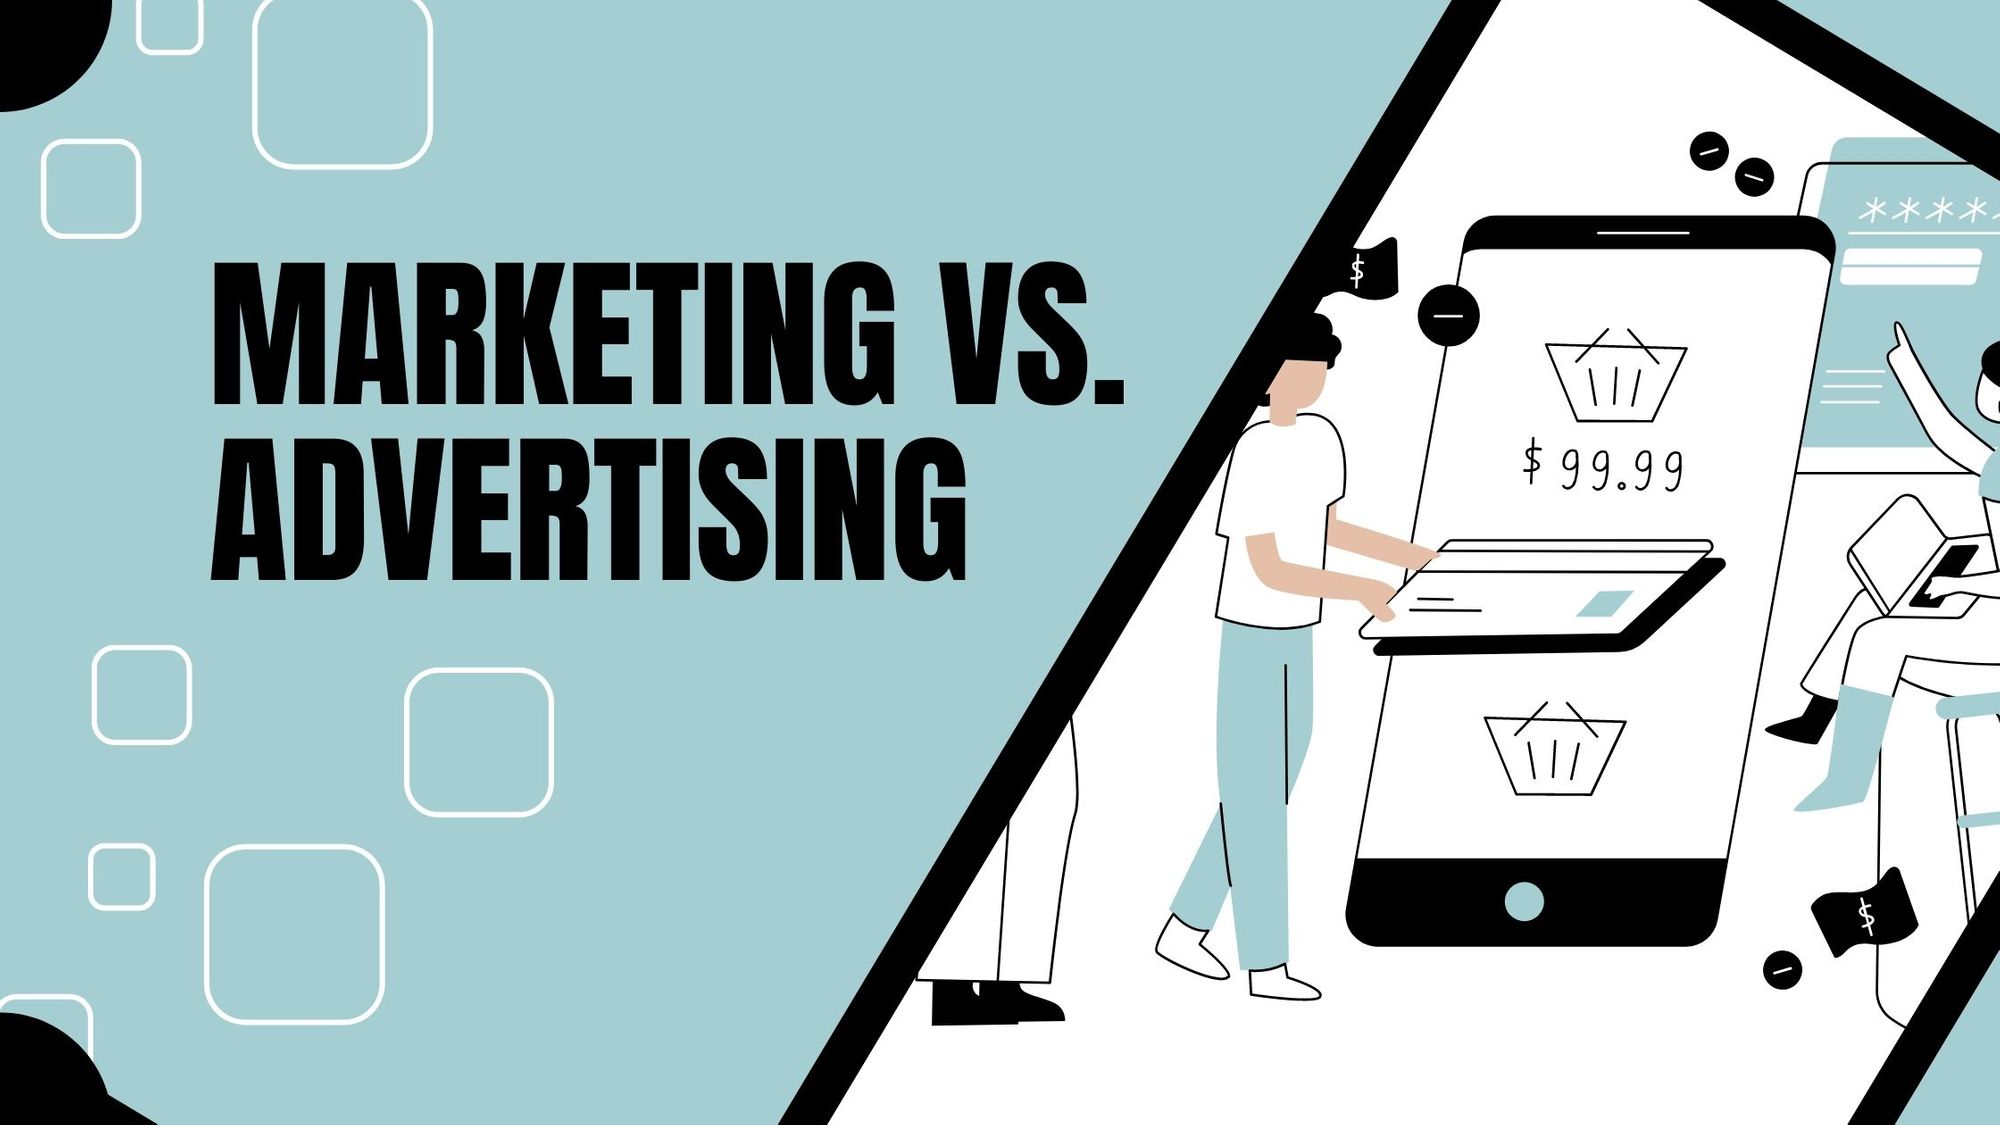 Marketing vs. Advertising - What Are the Key Differences?